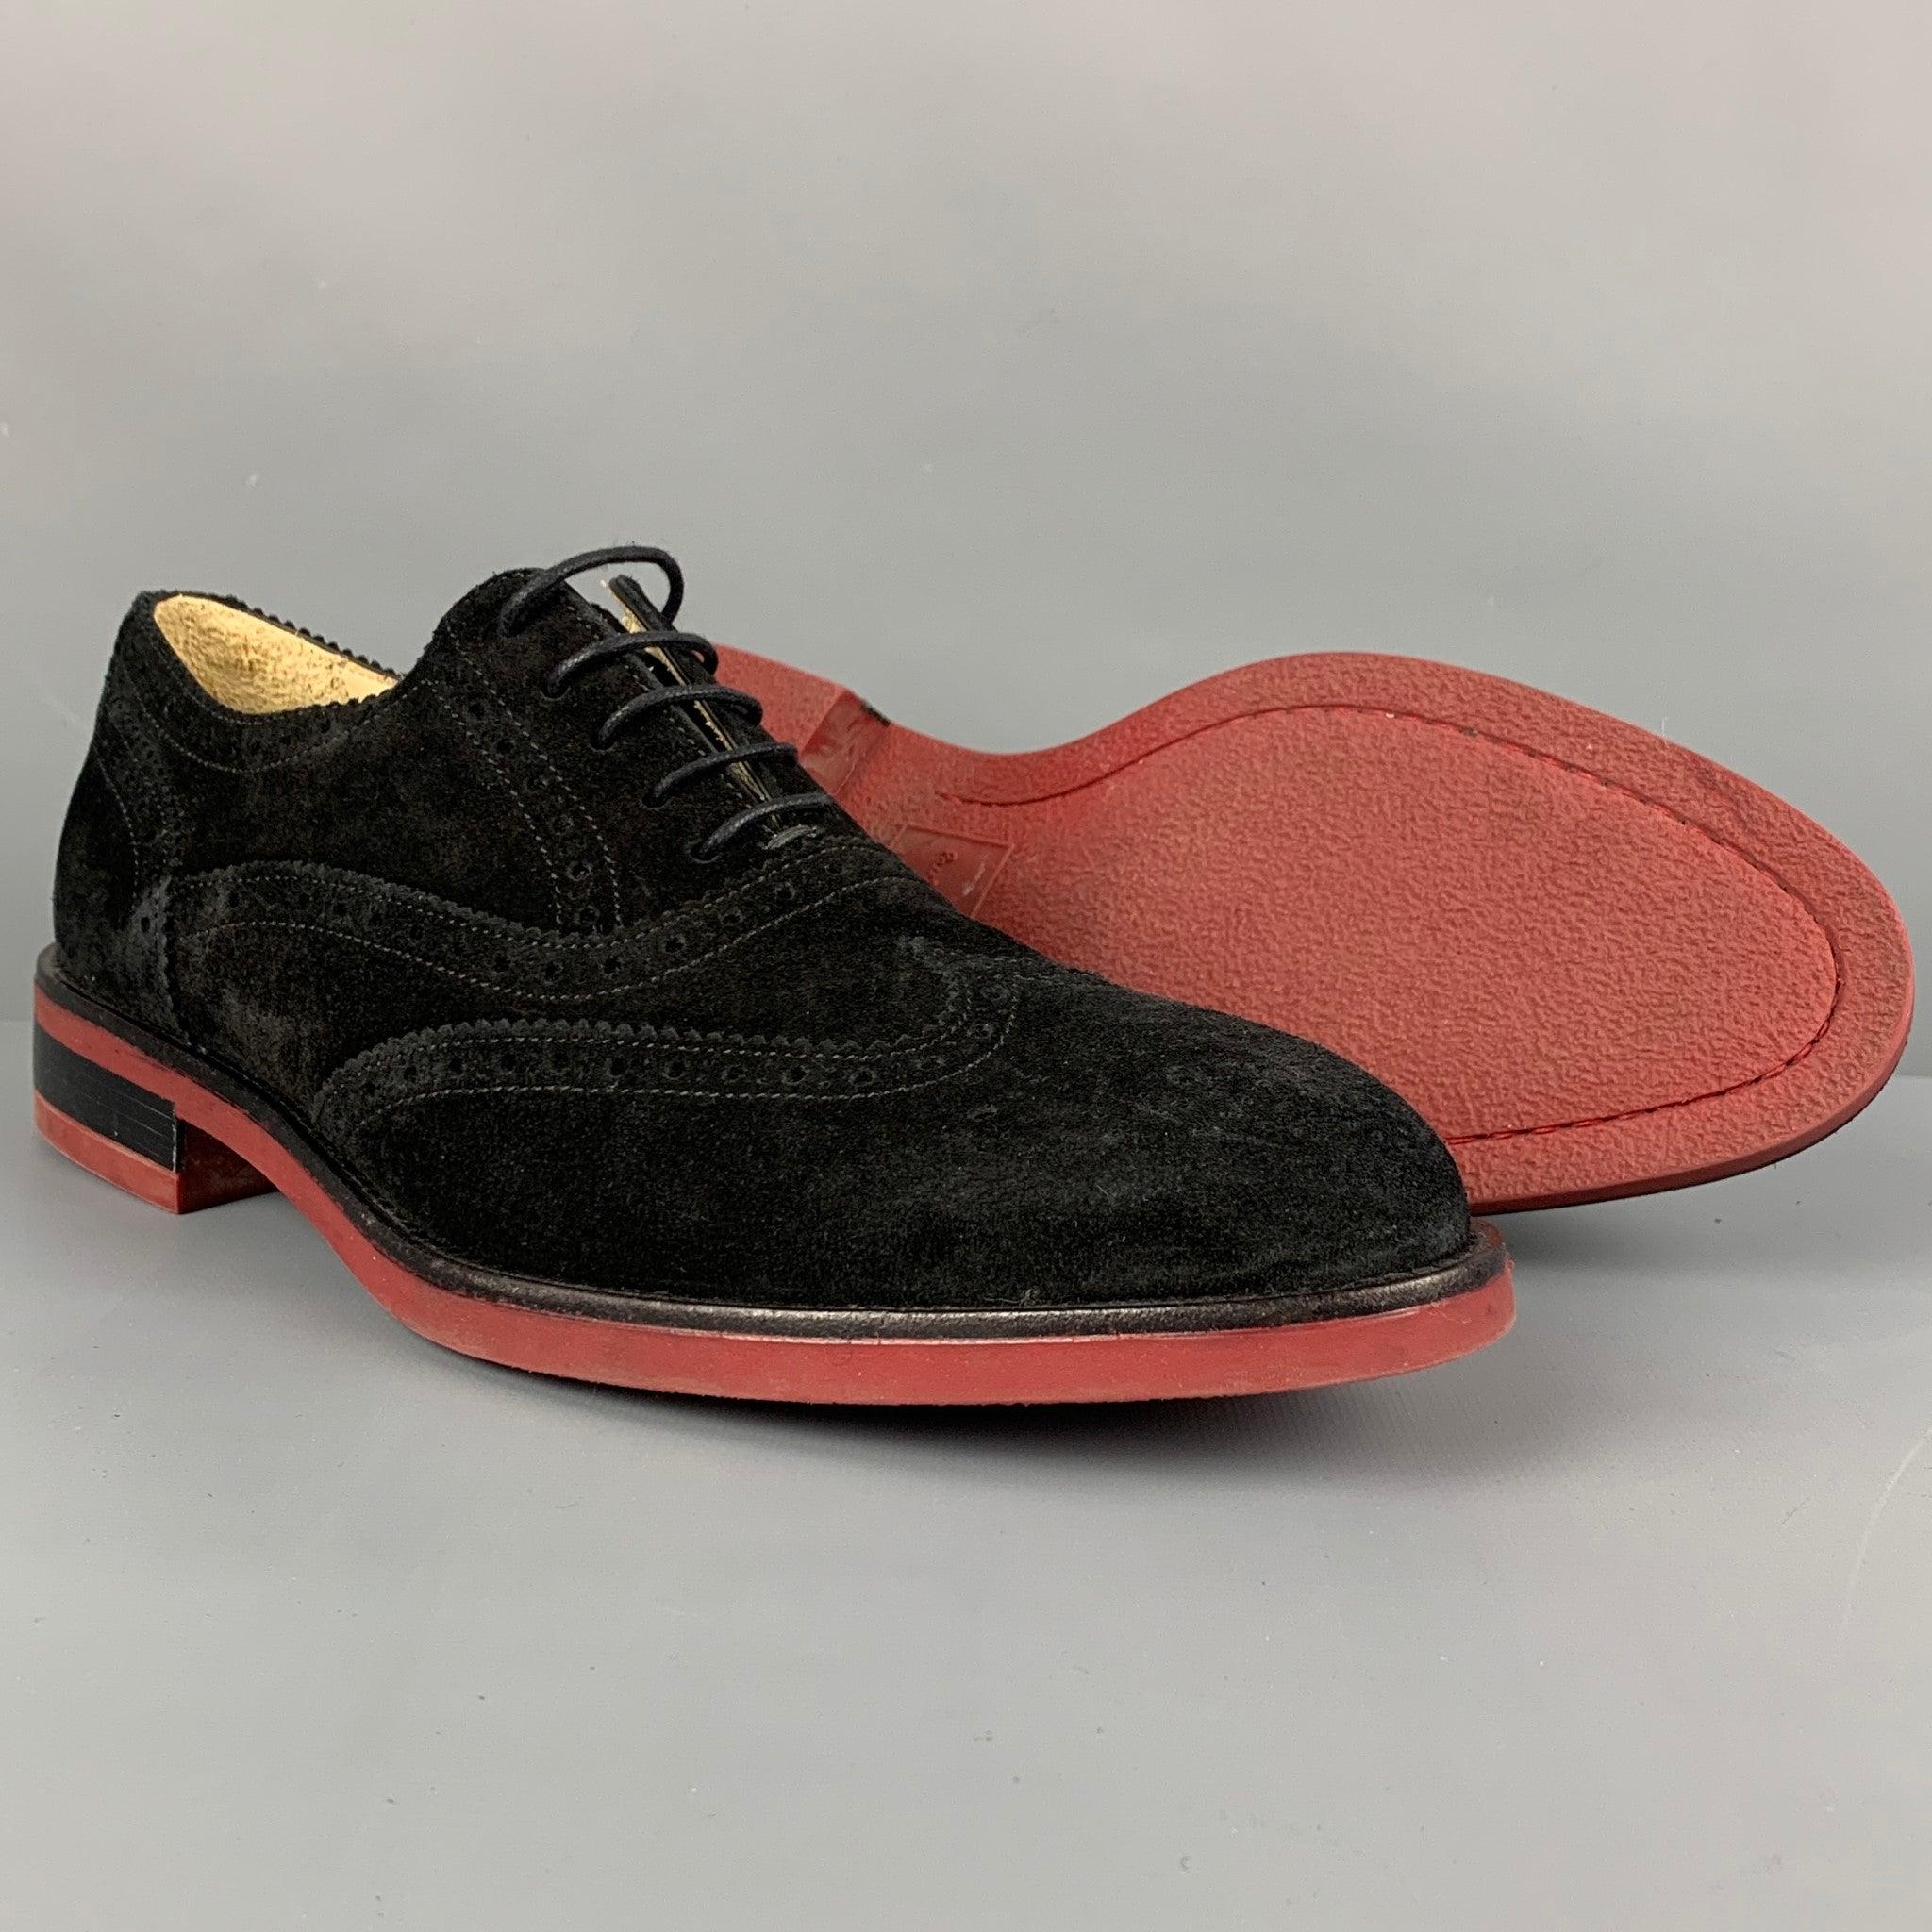 PAUL SMITH Size 10.5 Black Brick Perforated Leather Wingtip Loafers In Good Condition For Sale In San Francisco, CA